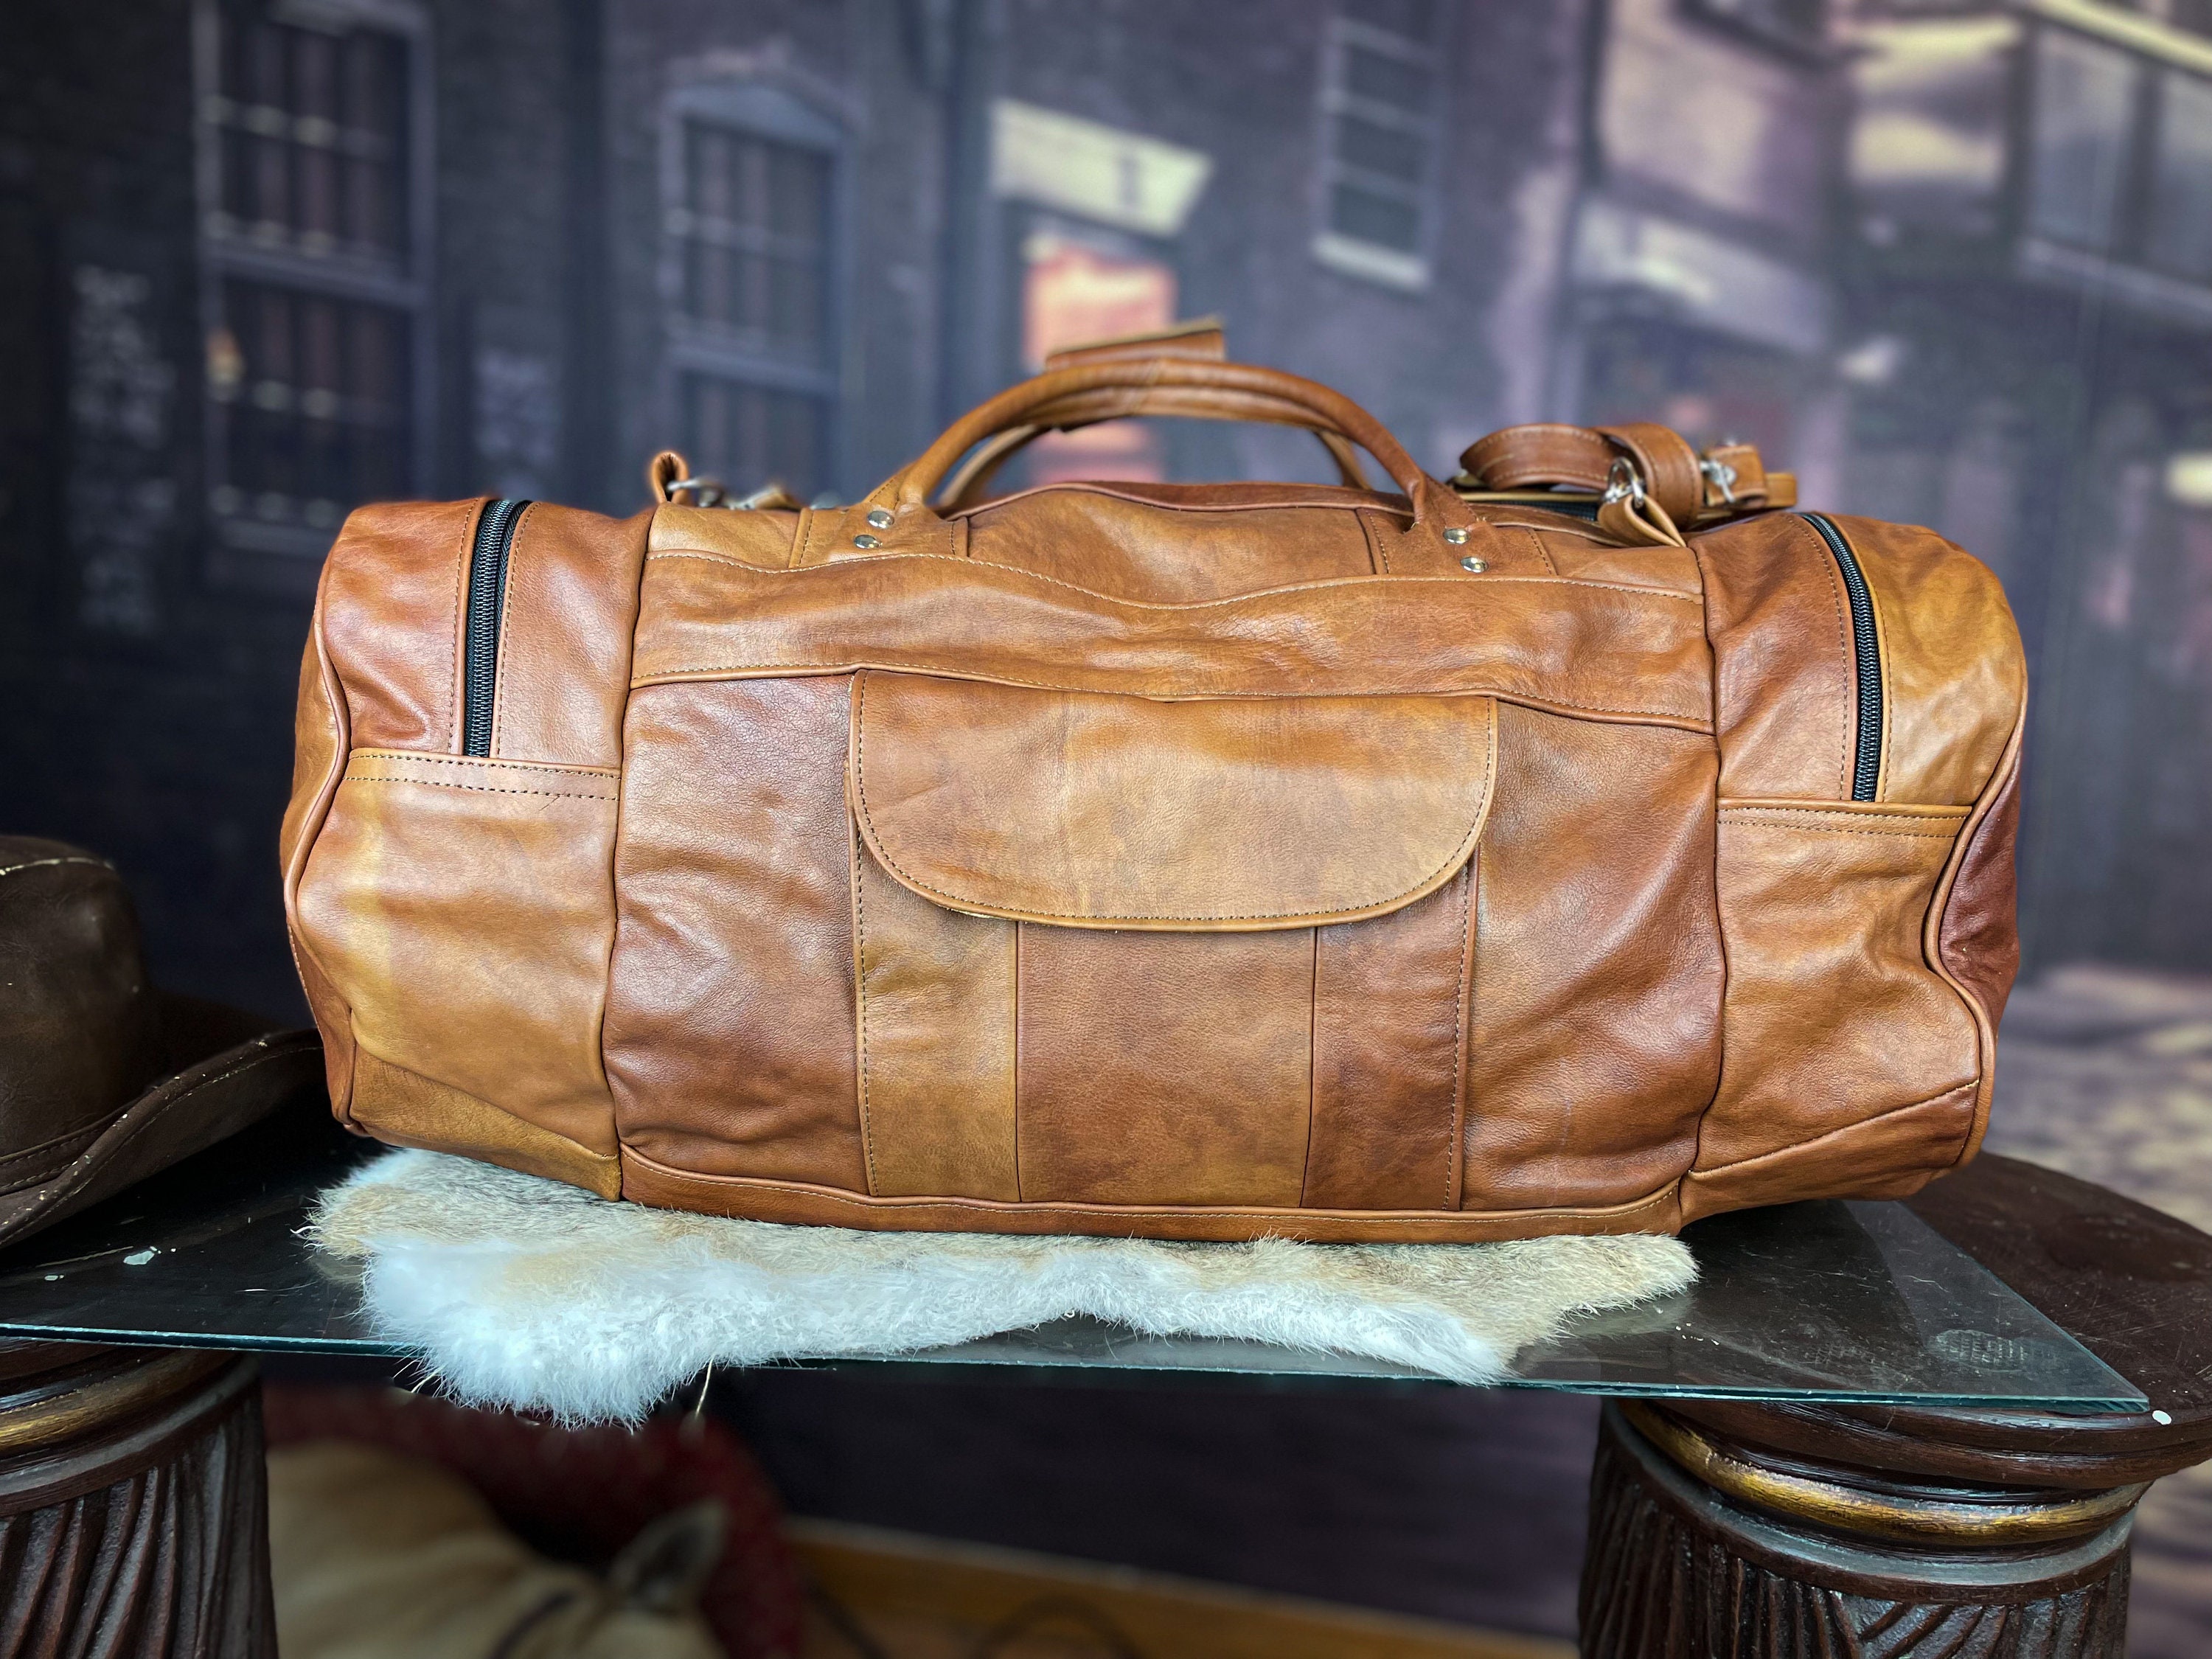 Brown Tumbled Leather 2 Bag Set (Commuter and Duffle)